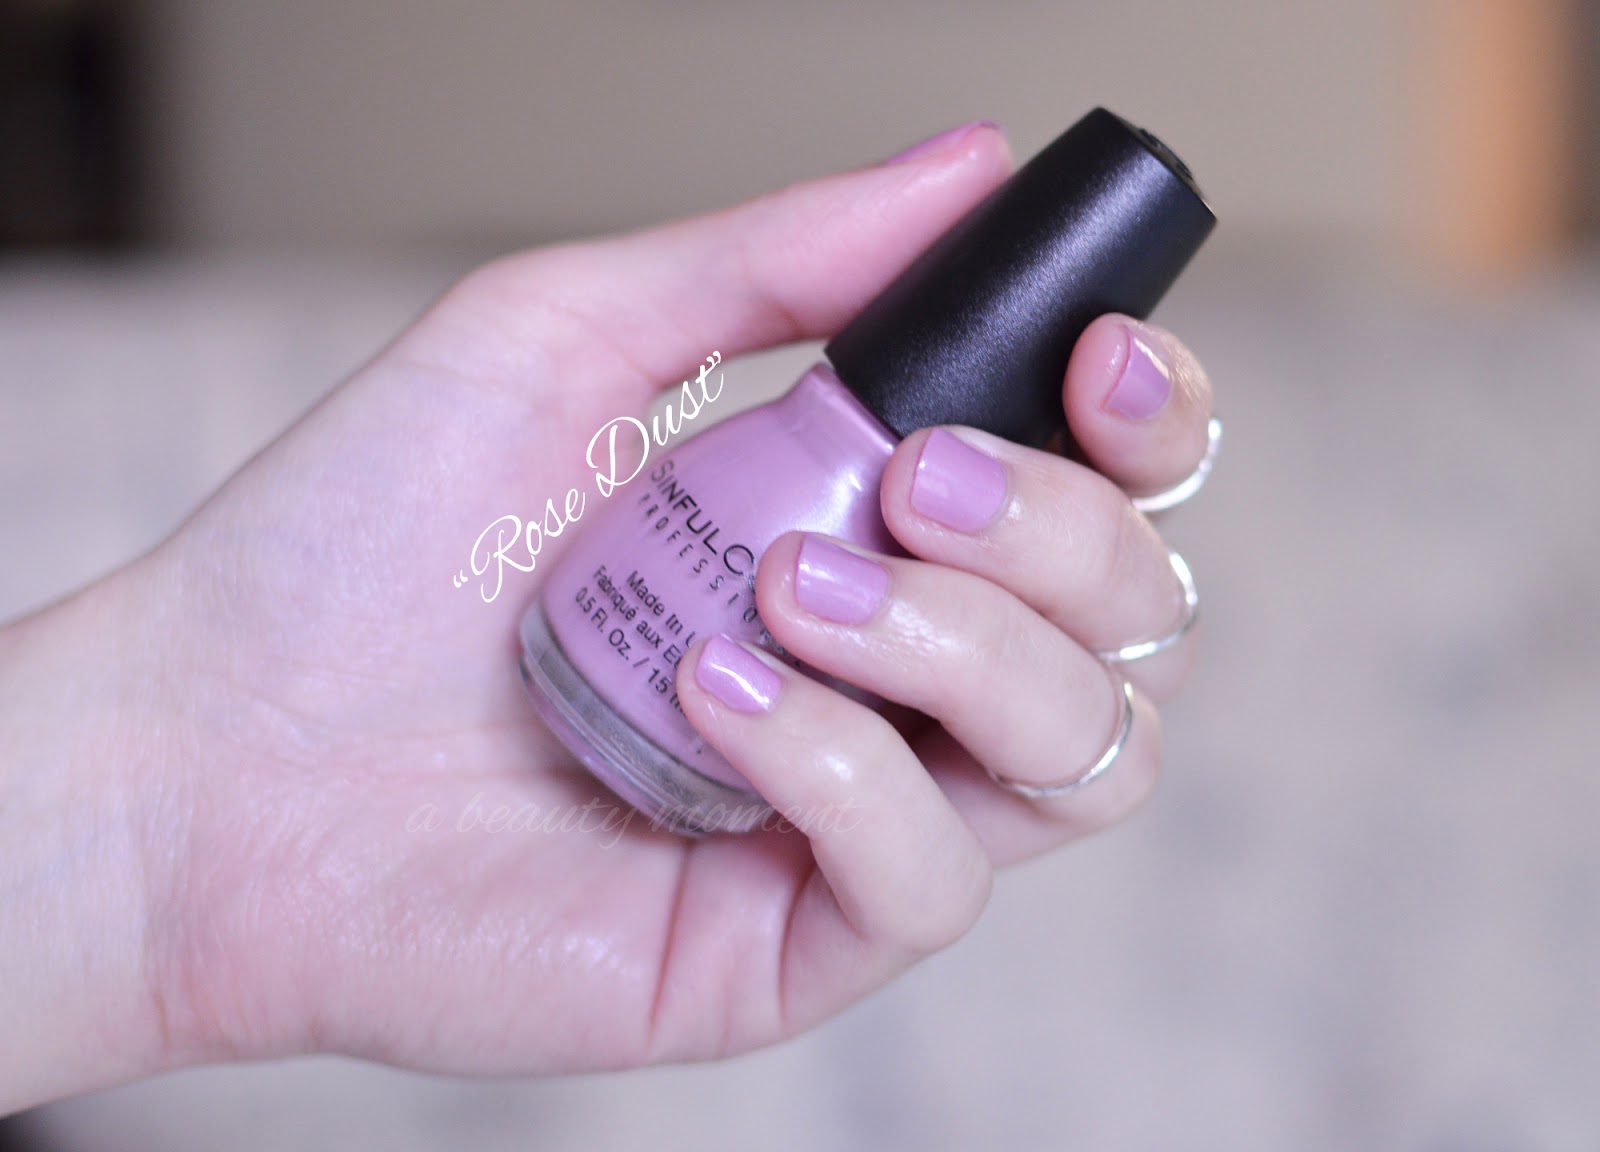 A Beauty Moment SINFUL COLORS NAIL COLOR IN ROSE DUST